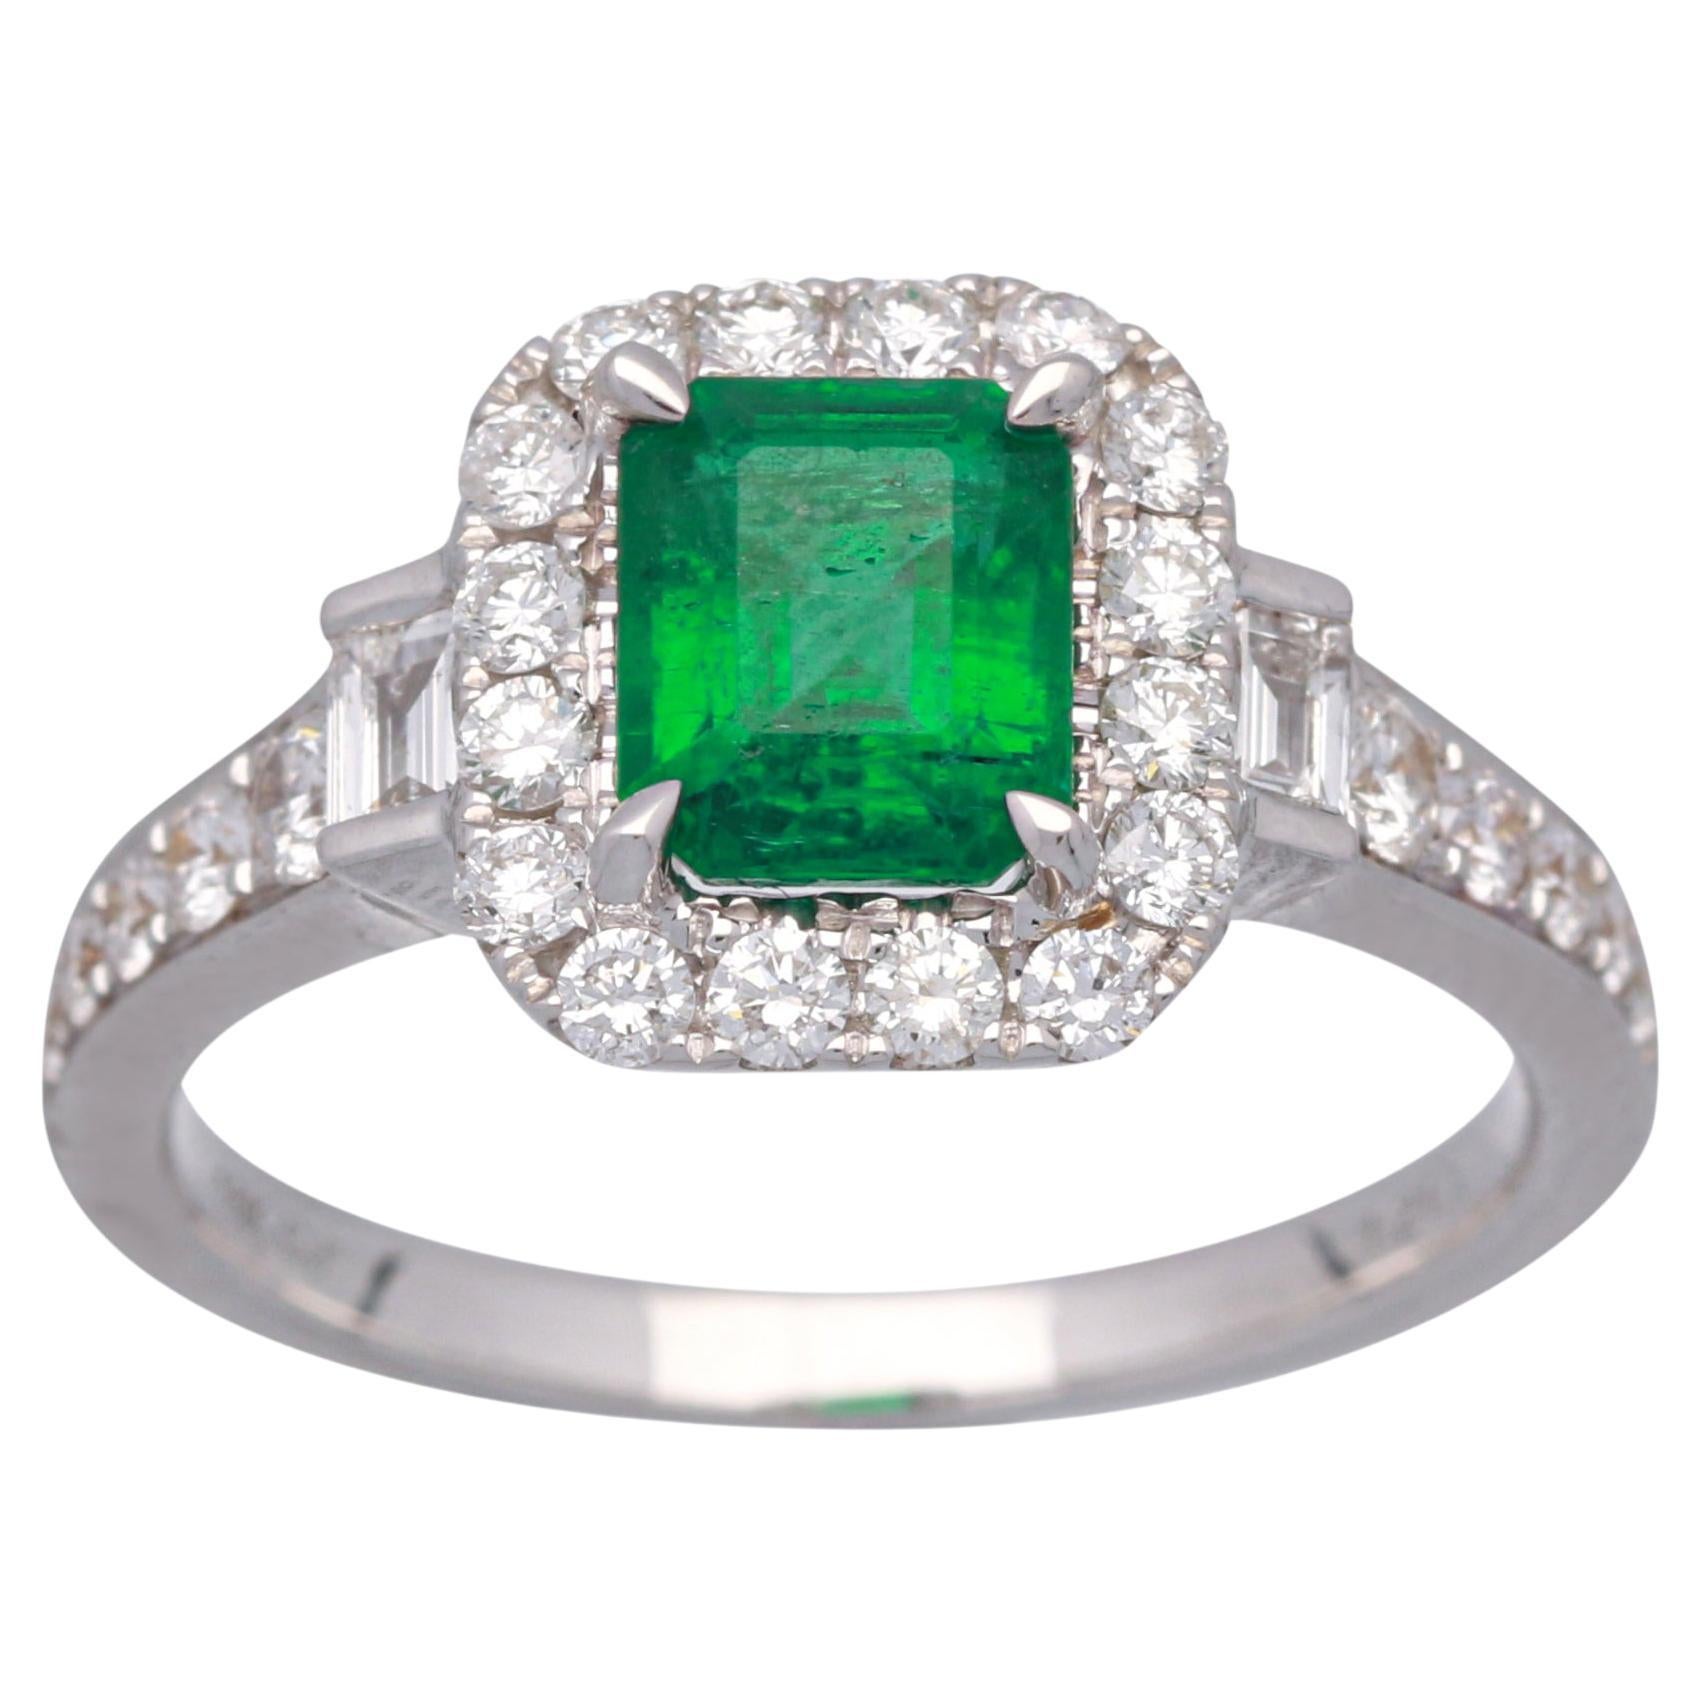 1.60 Carat Emerald Cut Emerald and Diamond Accents 18K White Gold Wedding Ring